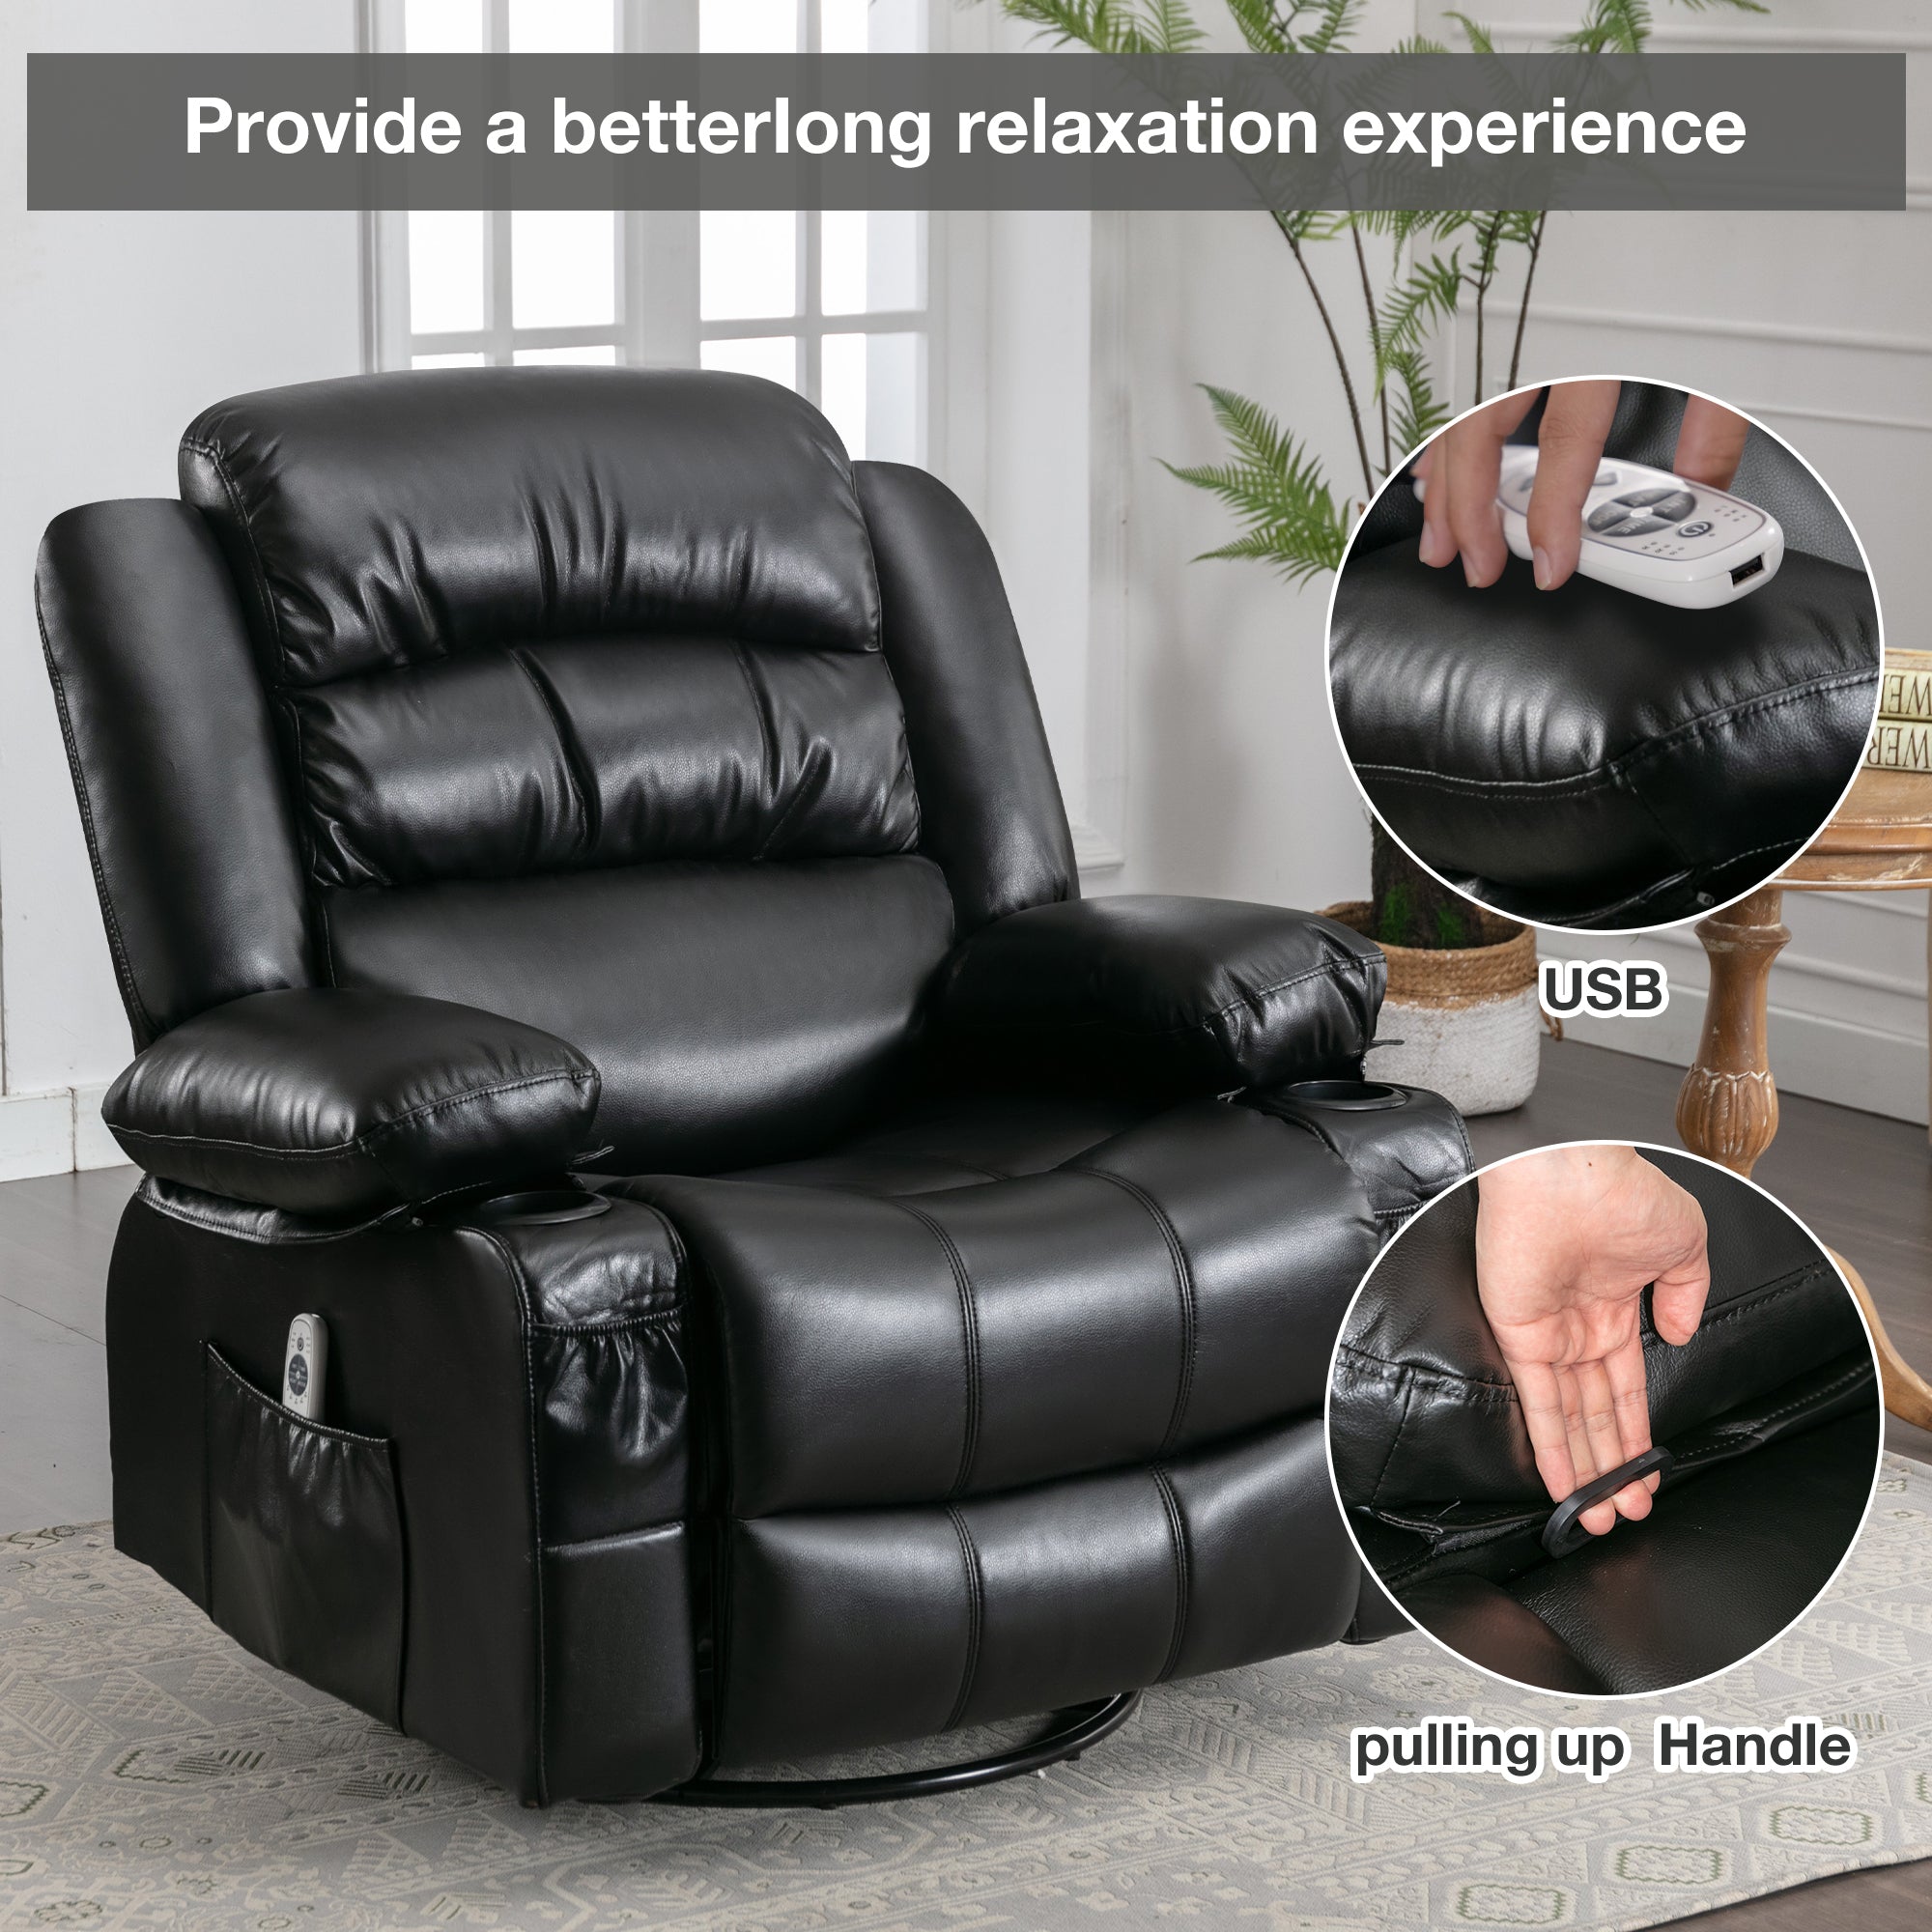 Riley Black Faux Leather Swivel Rocker Recliner Chair with Massage and Heat